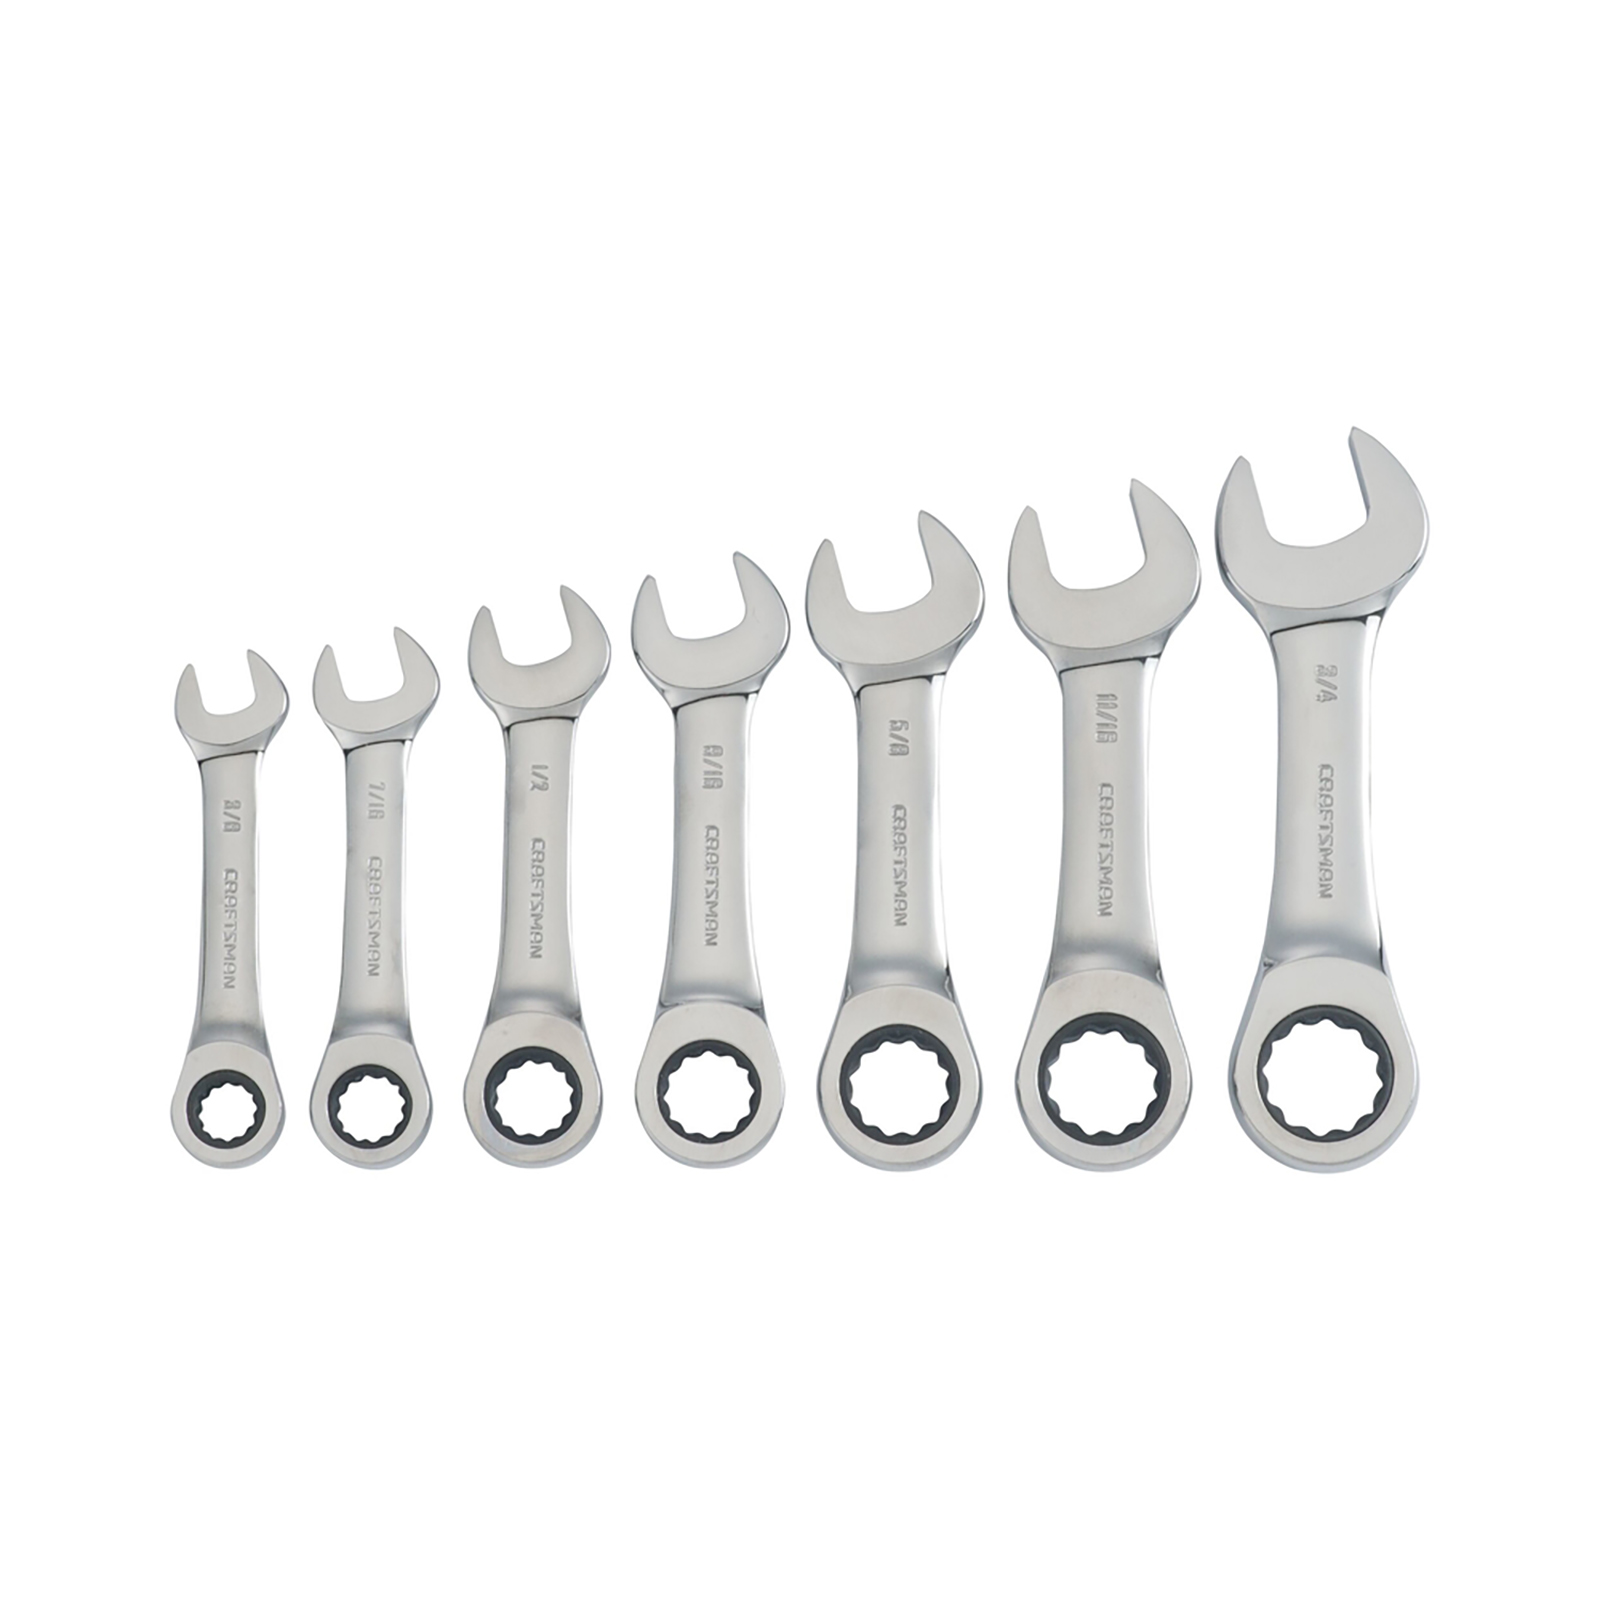 Craftsman Ratcheting Chrome Polished Wrenches in Various Sizes Choose Size